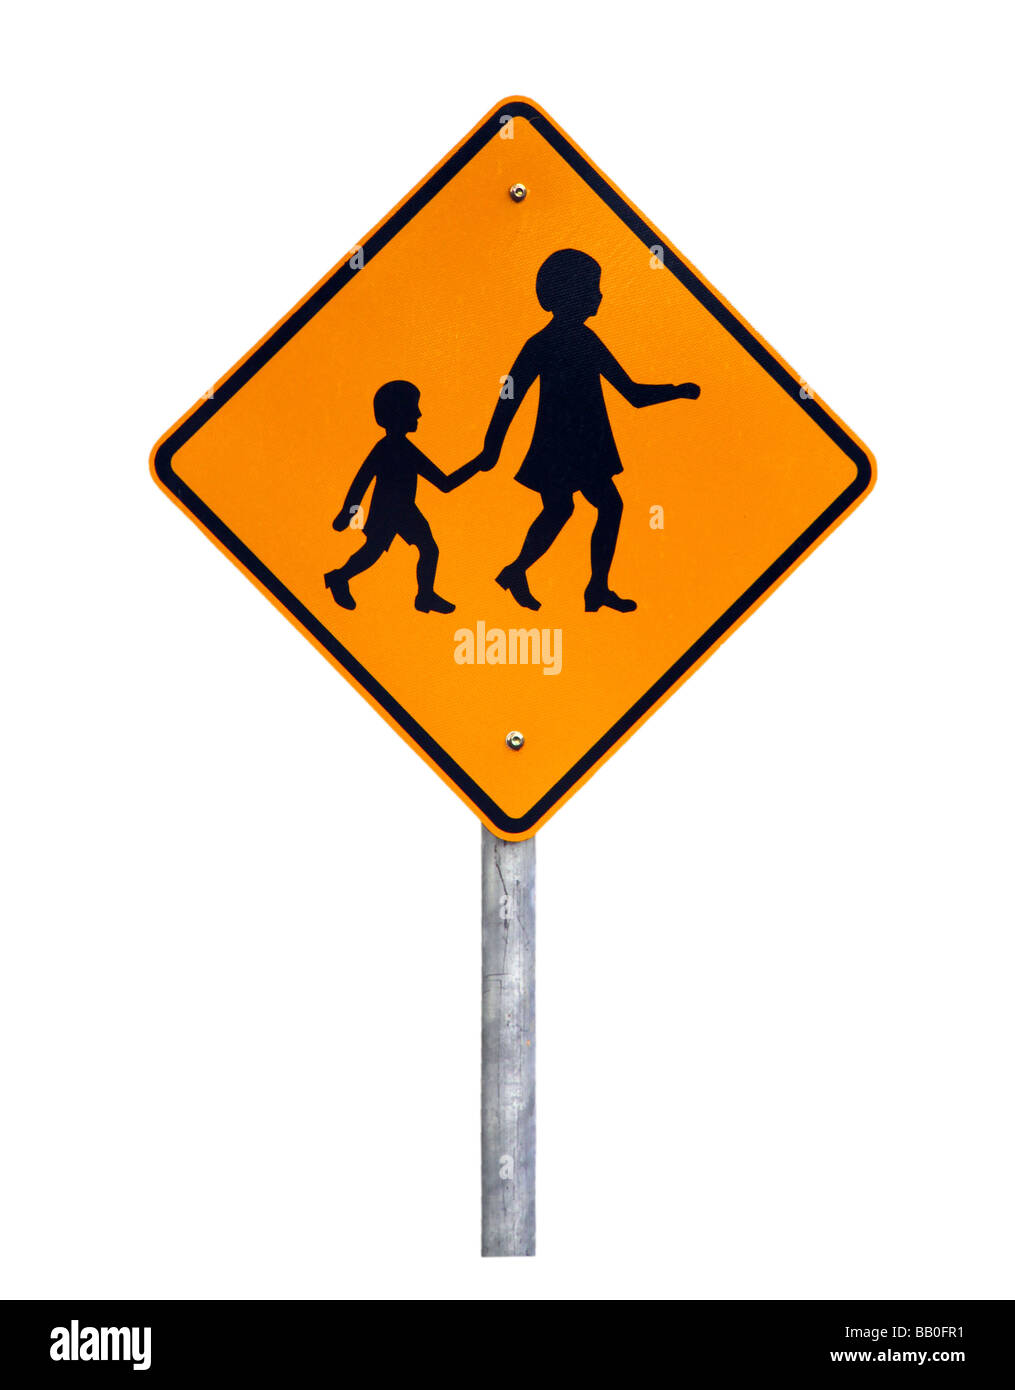 Warning Children Crossing Traffic Sign from Australia.  Isolated on White. Stock Photo